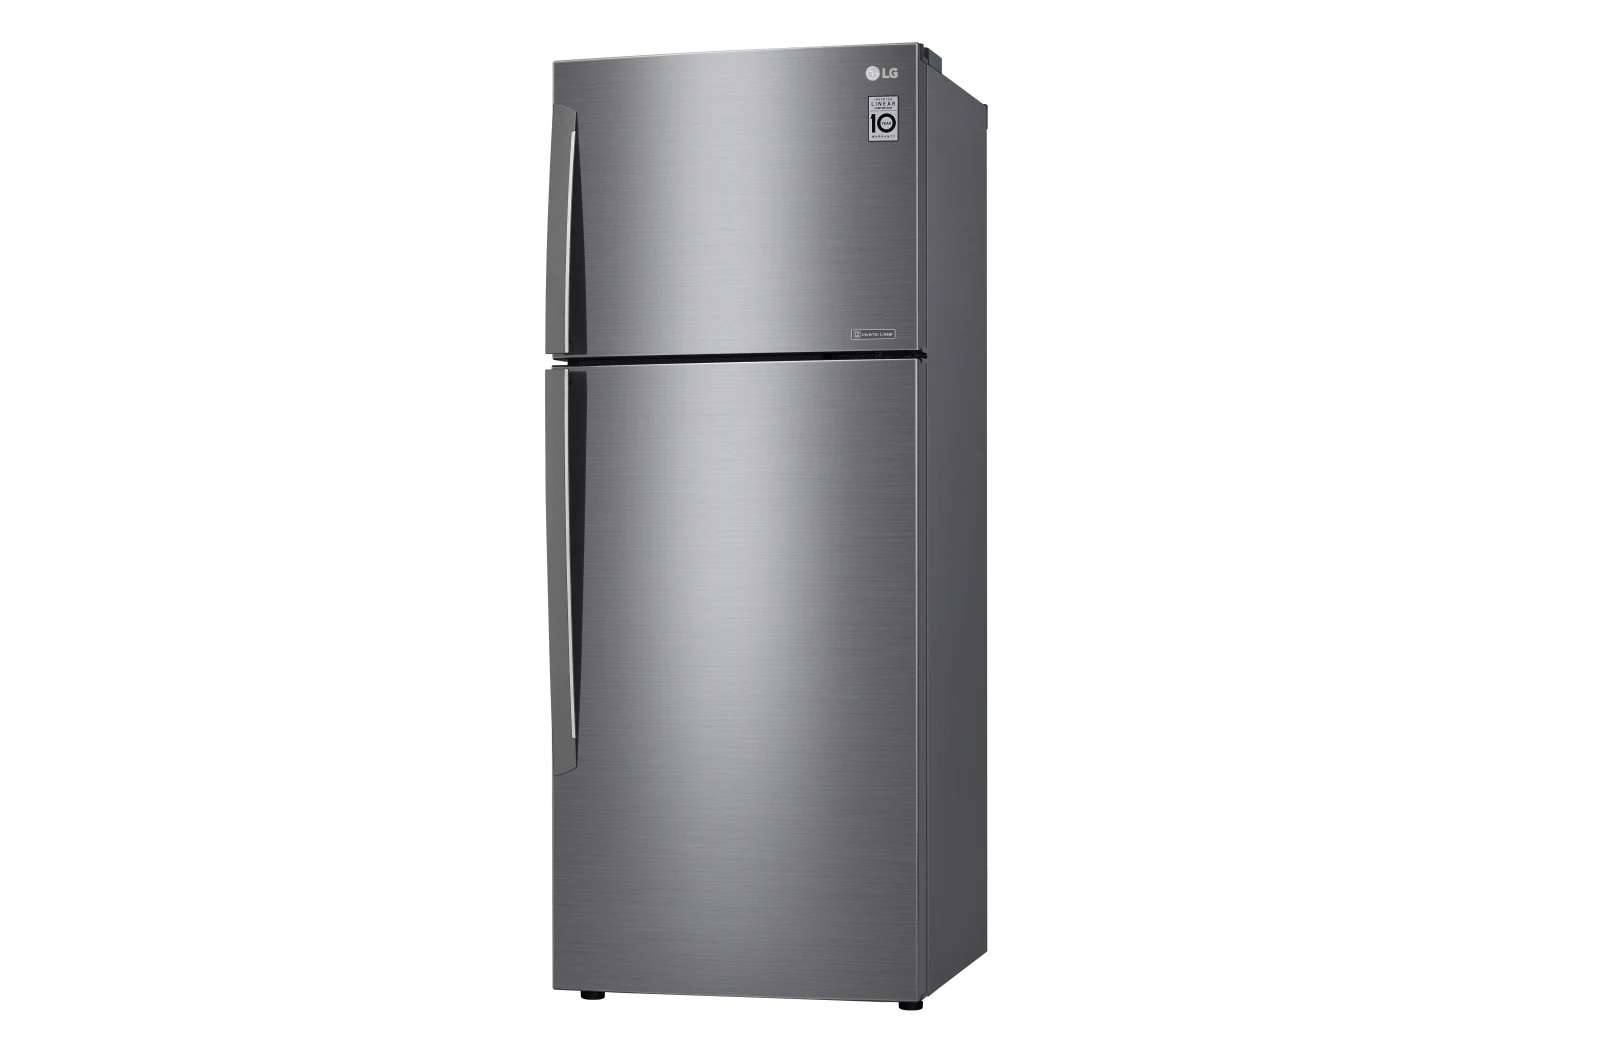 LG 471L Refrigerator With DoorCooling+™ Technology - Silver